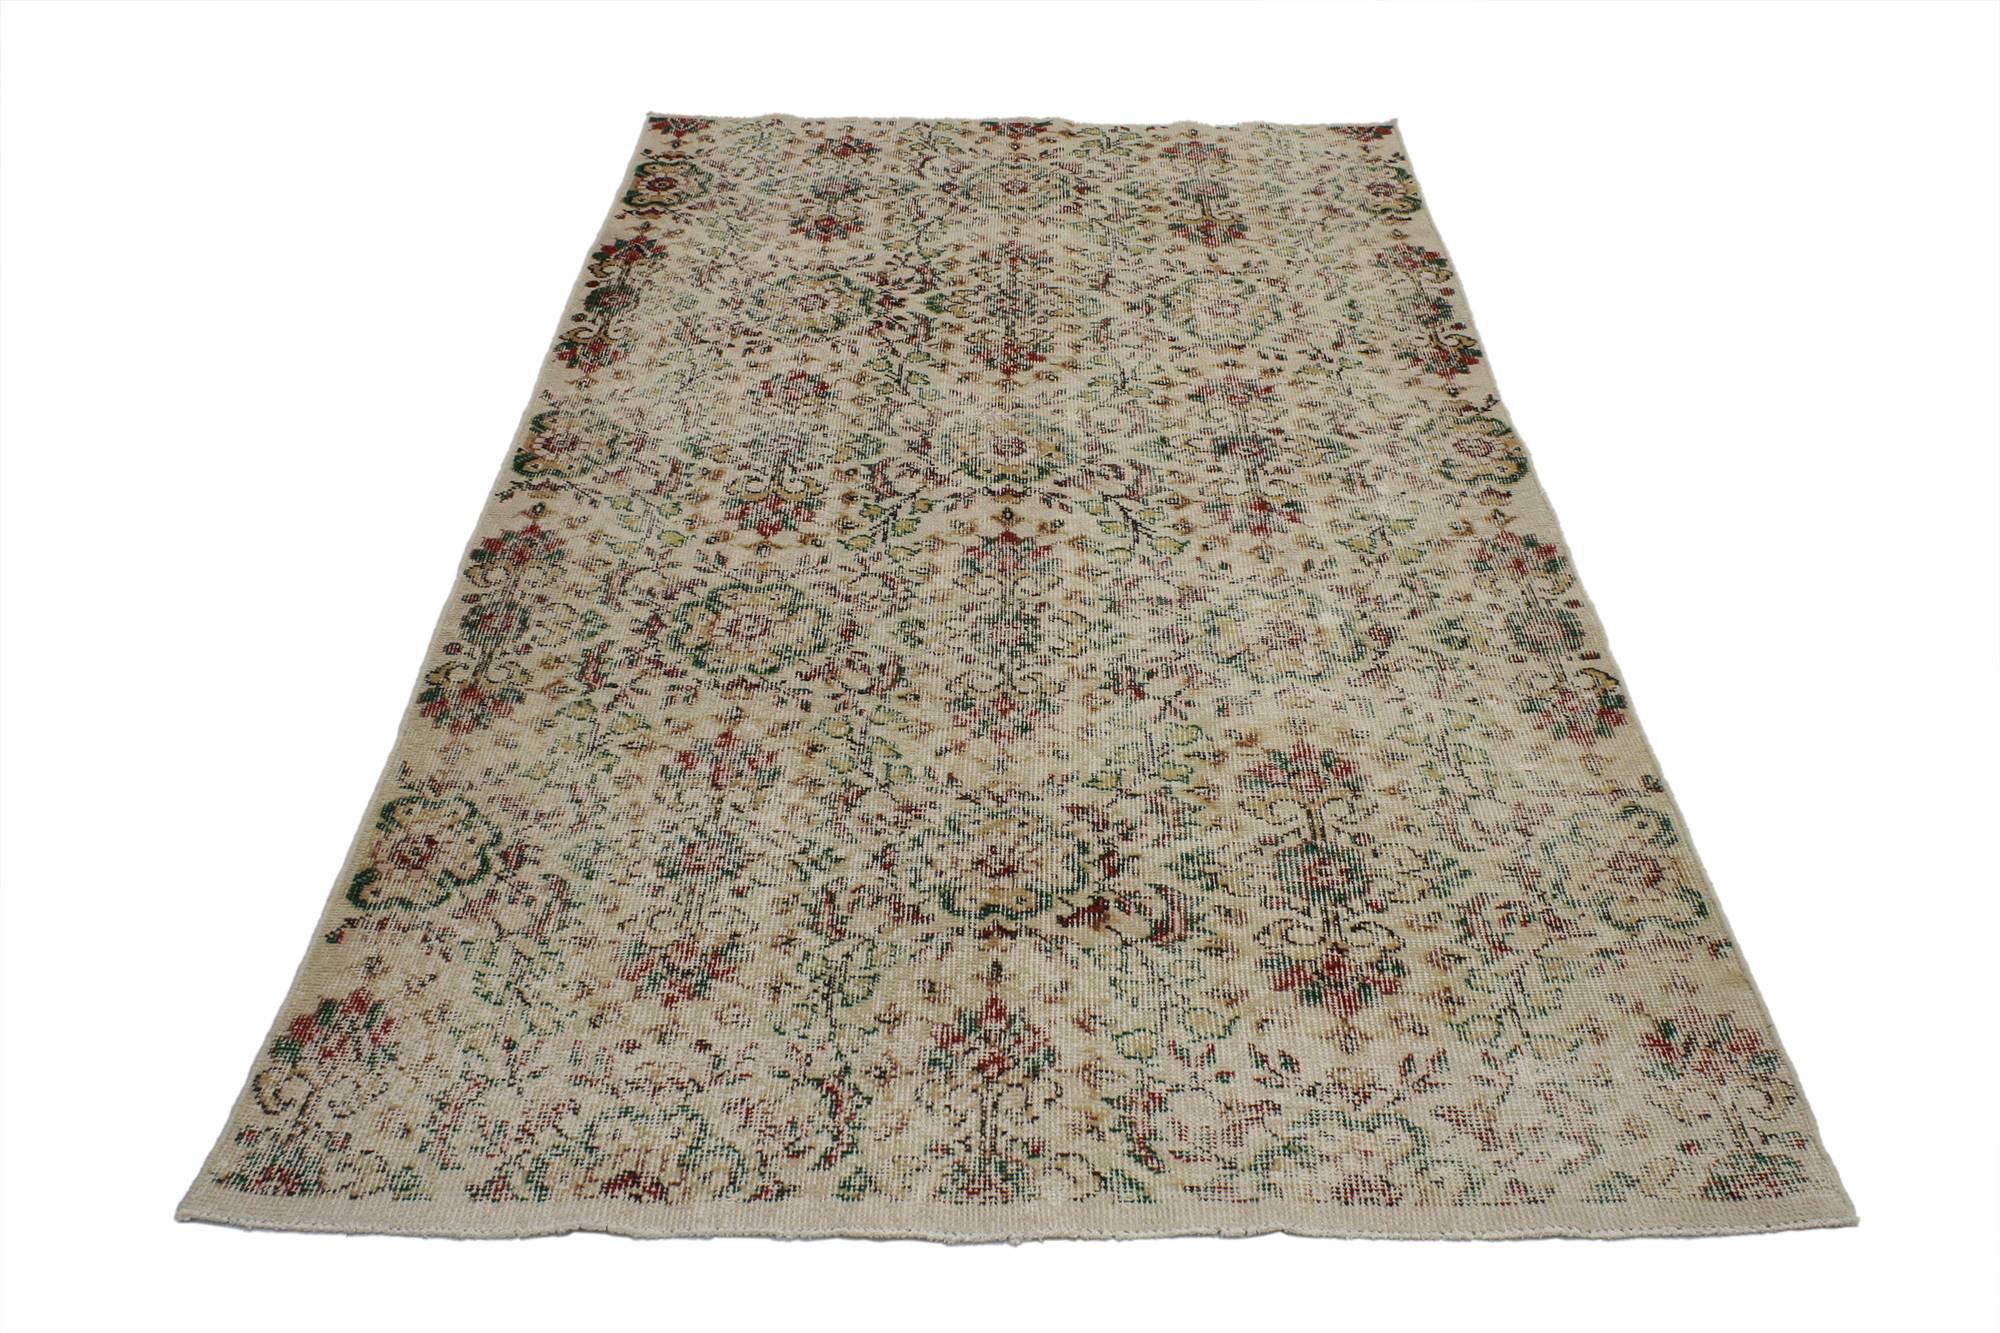 52011, distressed vintage Turkish Sivas rug with shabby chic farmhouse style. This hand-knotted wool distressed vintage Turkish Sivas rug features a shabby chic farmhouse style. The all-over floral pattern is composed of lush flowers and cruciform